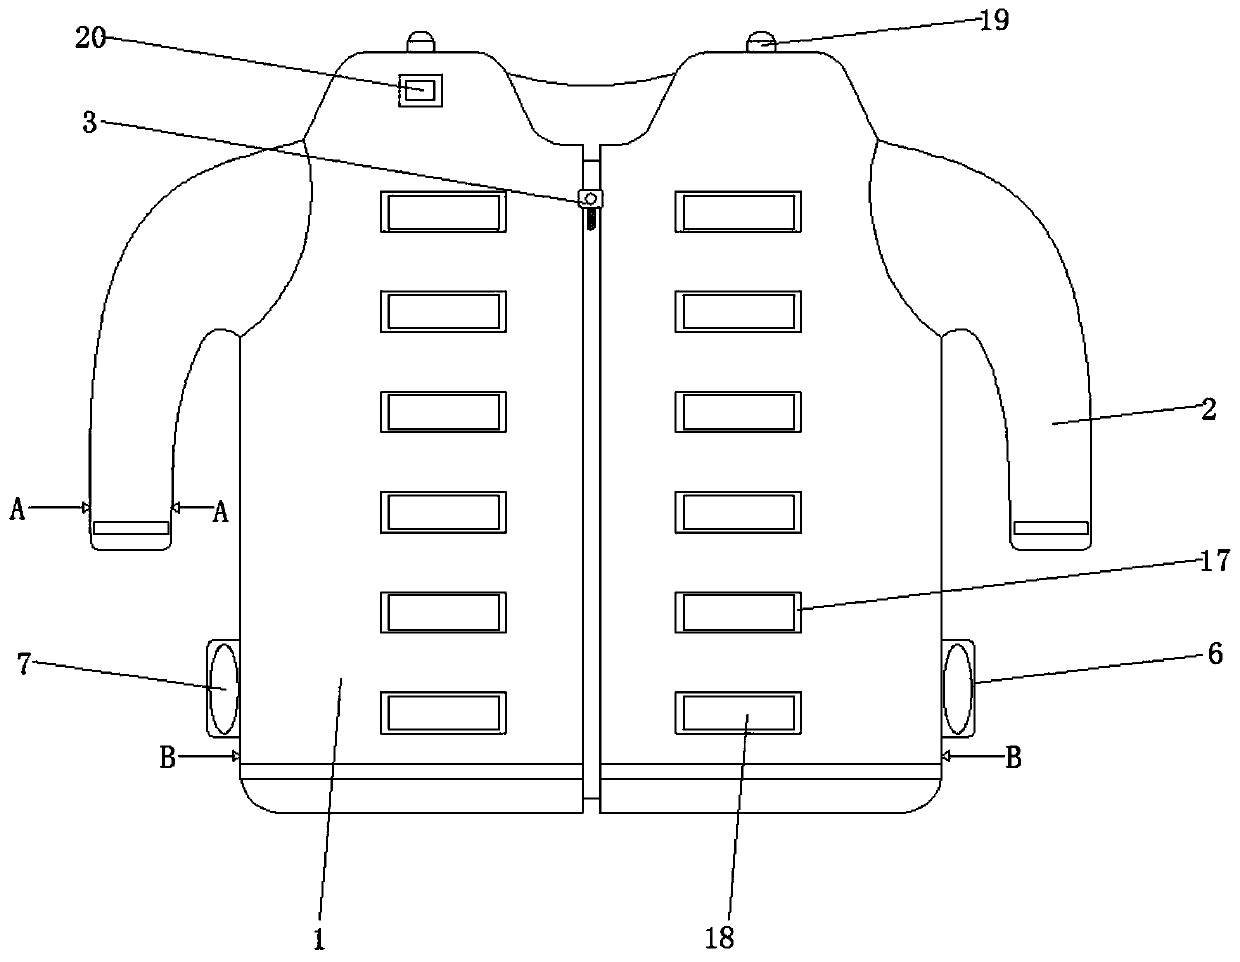 Cold-resistant life jacket